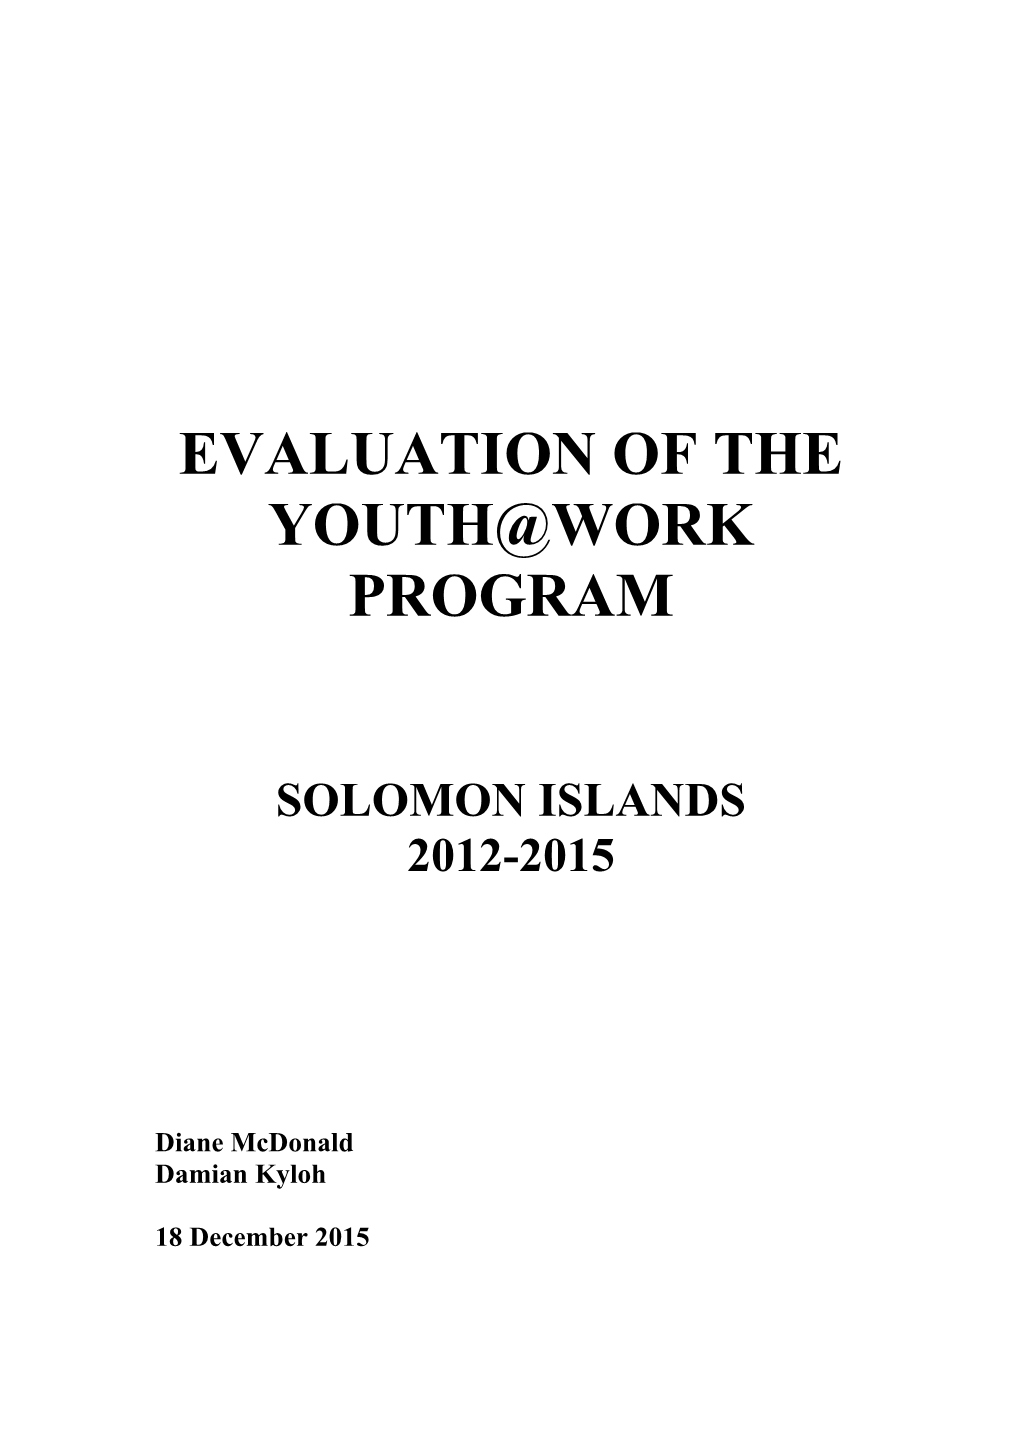 Evaluation of the Youth Work Program